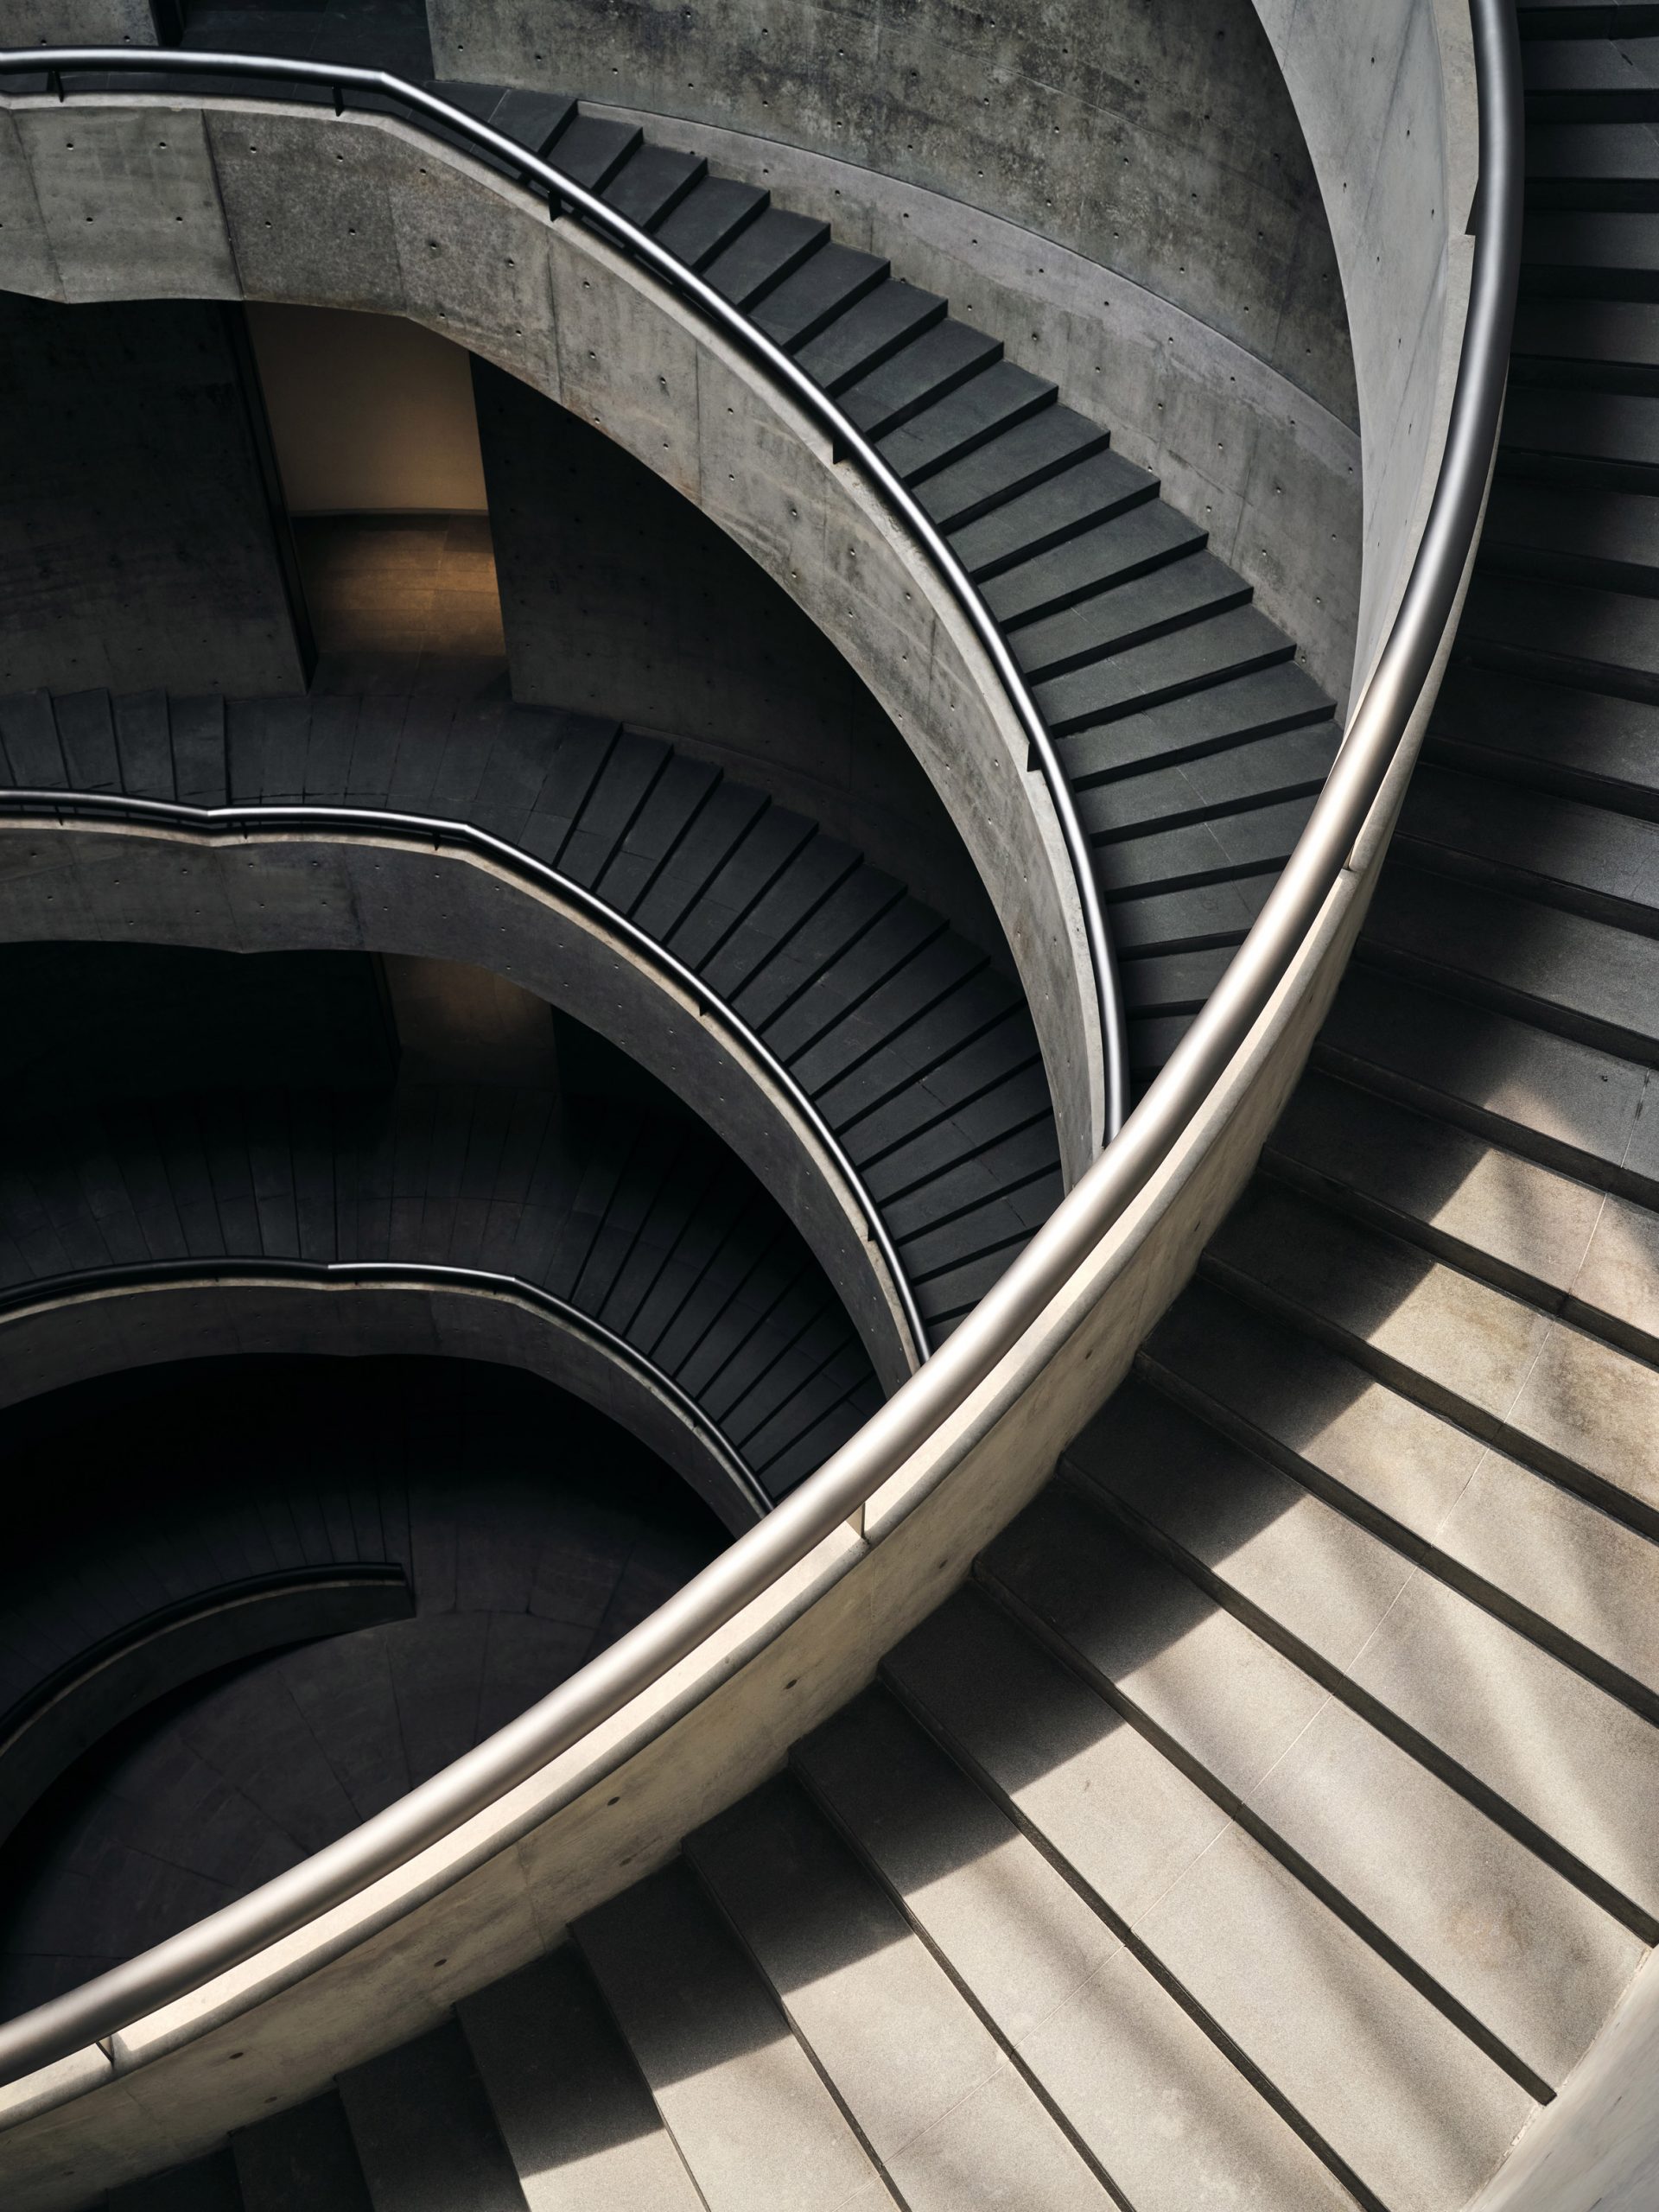 The helical staircases inside He Art Museum's central courtyard